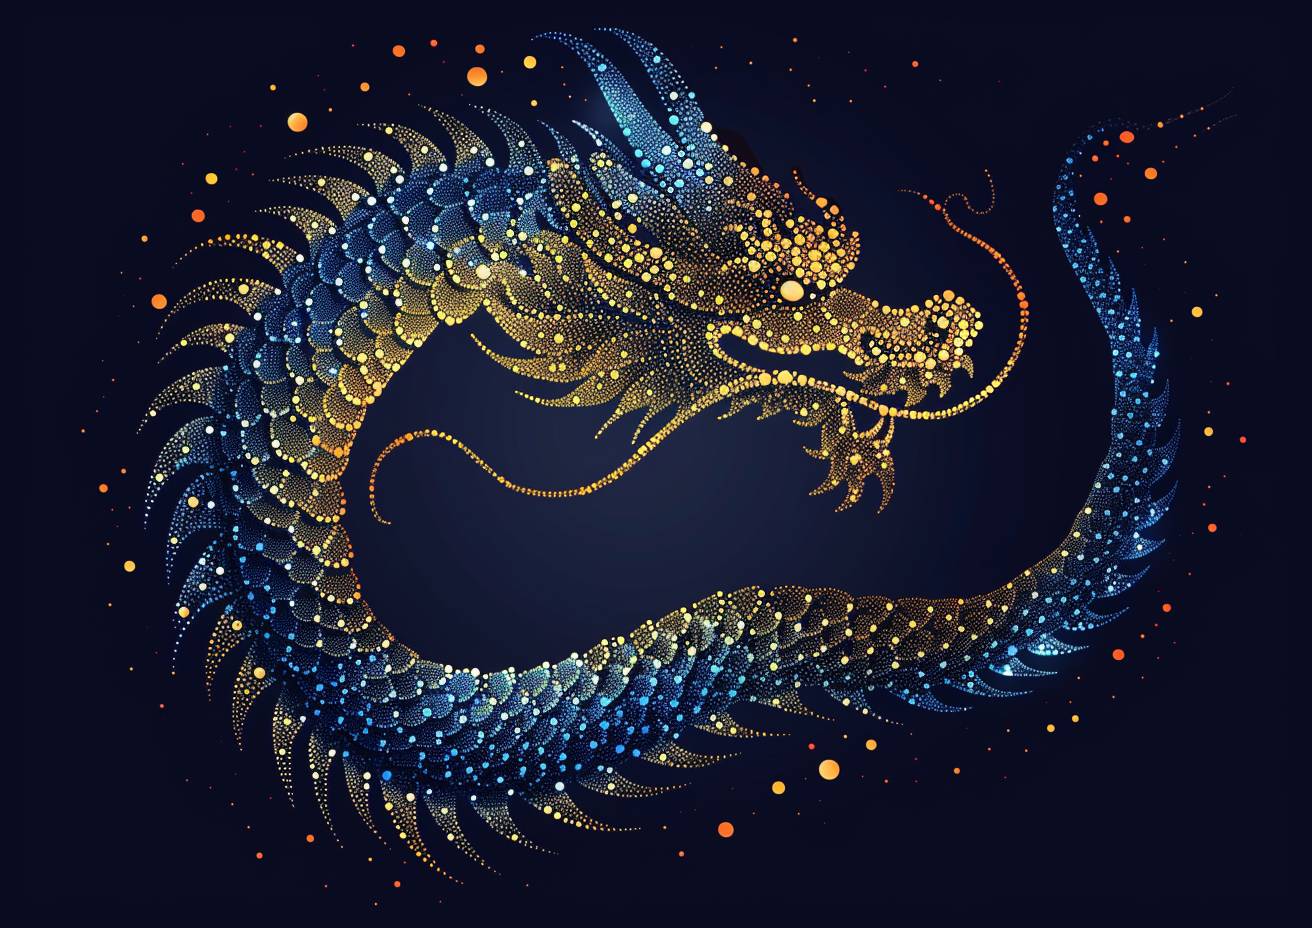 A vector illustration on a blank canvas, using cobalt blue and gold phosphor dots of varying sizes, forming an ouroboros symbol in Chinese dragon style, utilizing negative space